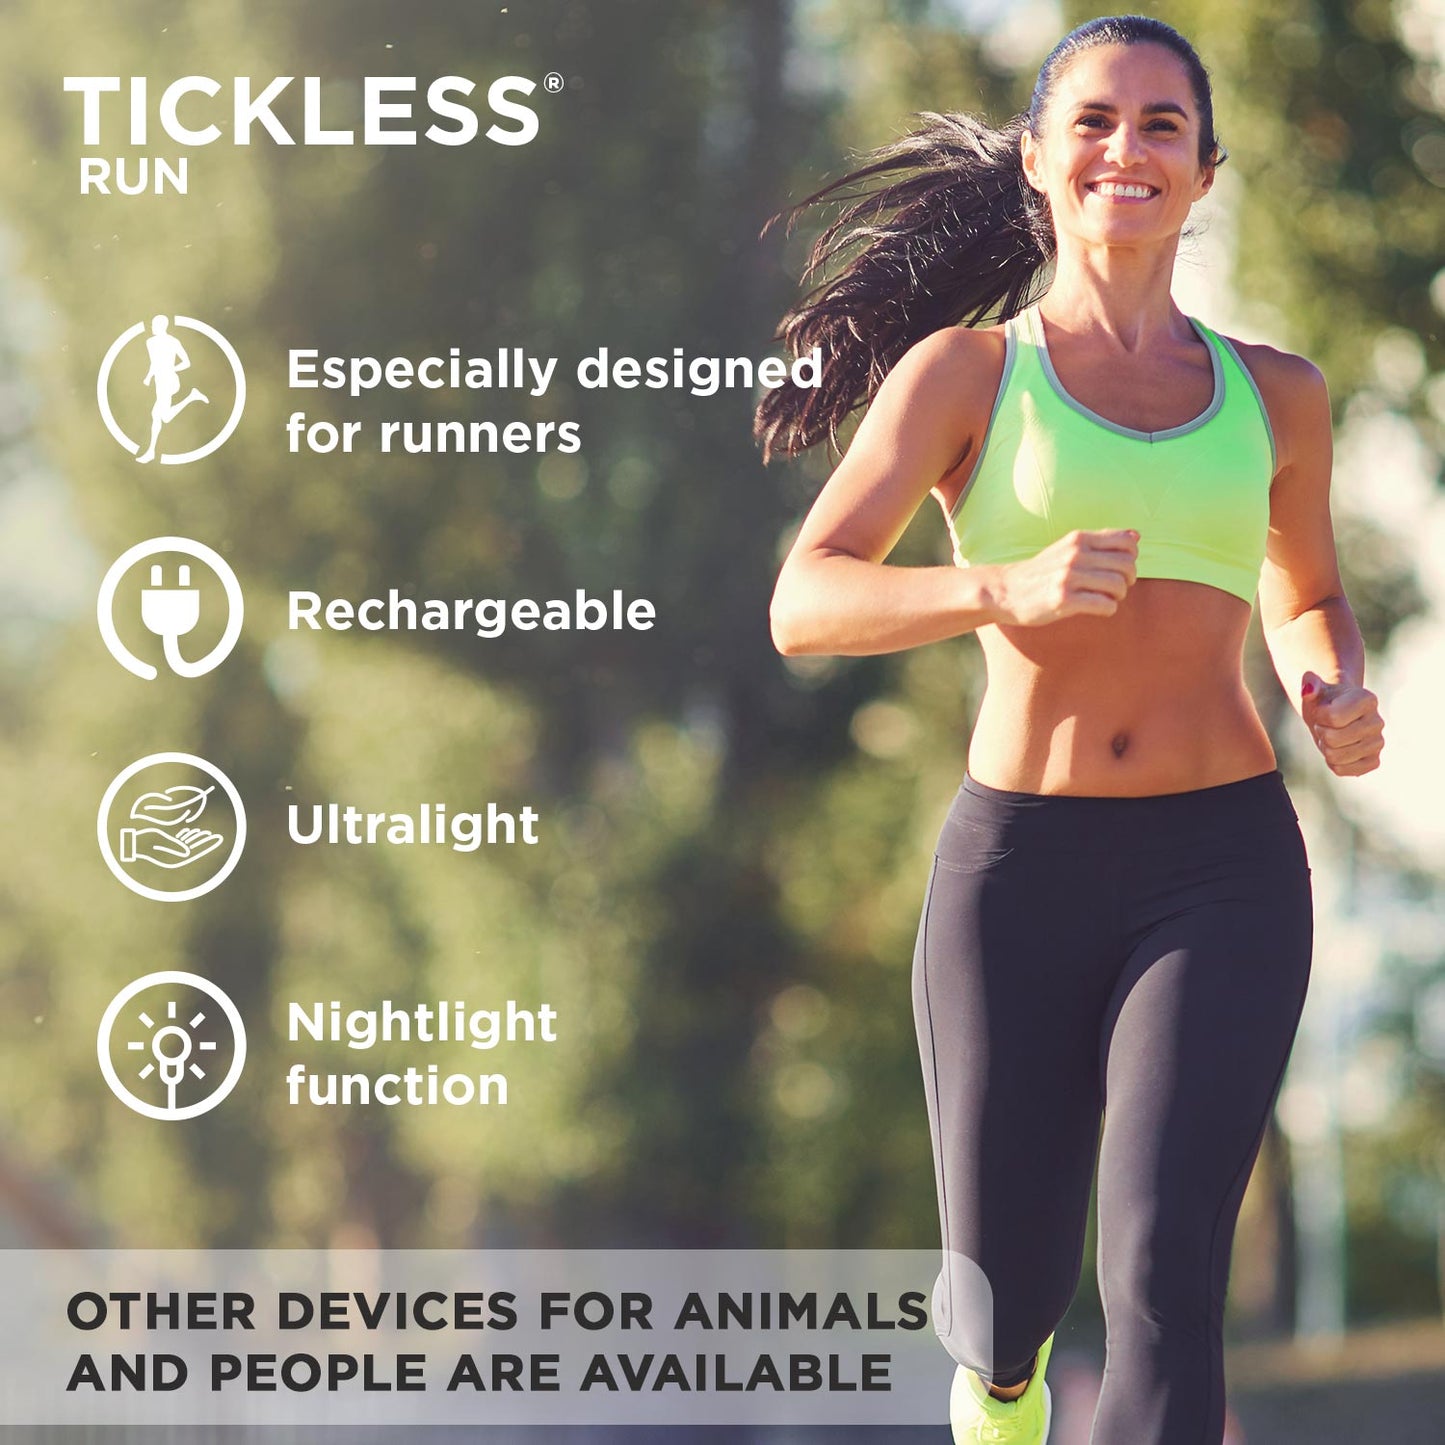 TicklessUSA Tickless Run Chemical-Free Tick Repellent for Runners sonicguard SonicGuard sonicguardusa SonicGuardUSA tick repeller ultrasonic Tickless TicklessUSA tick and flea repellent safe